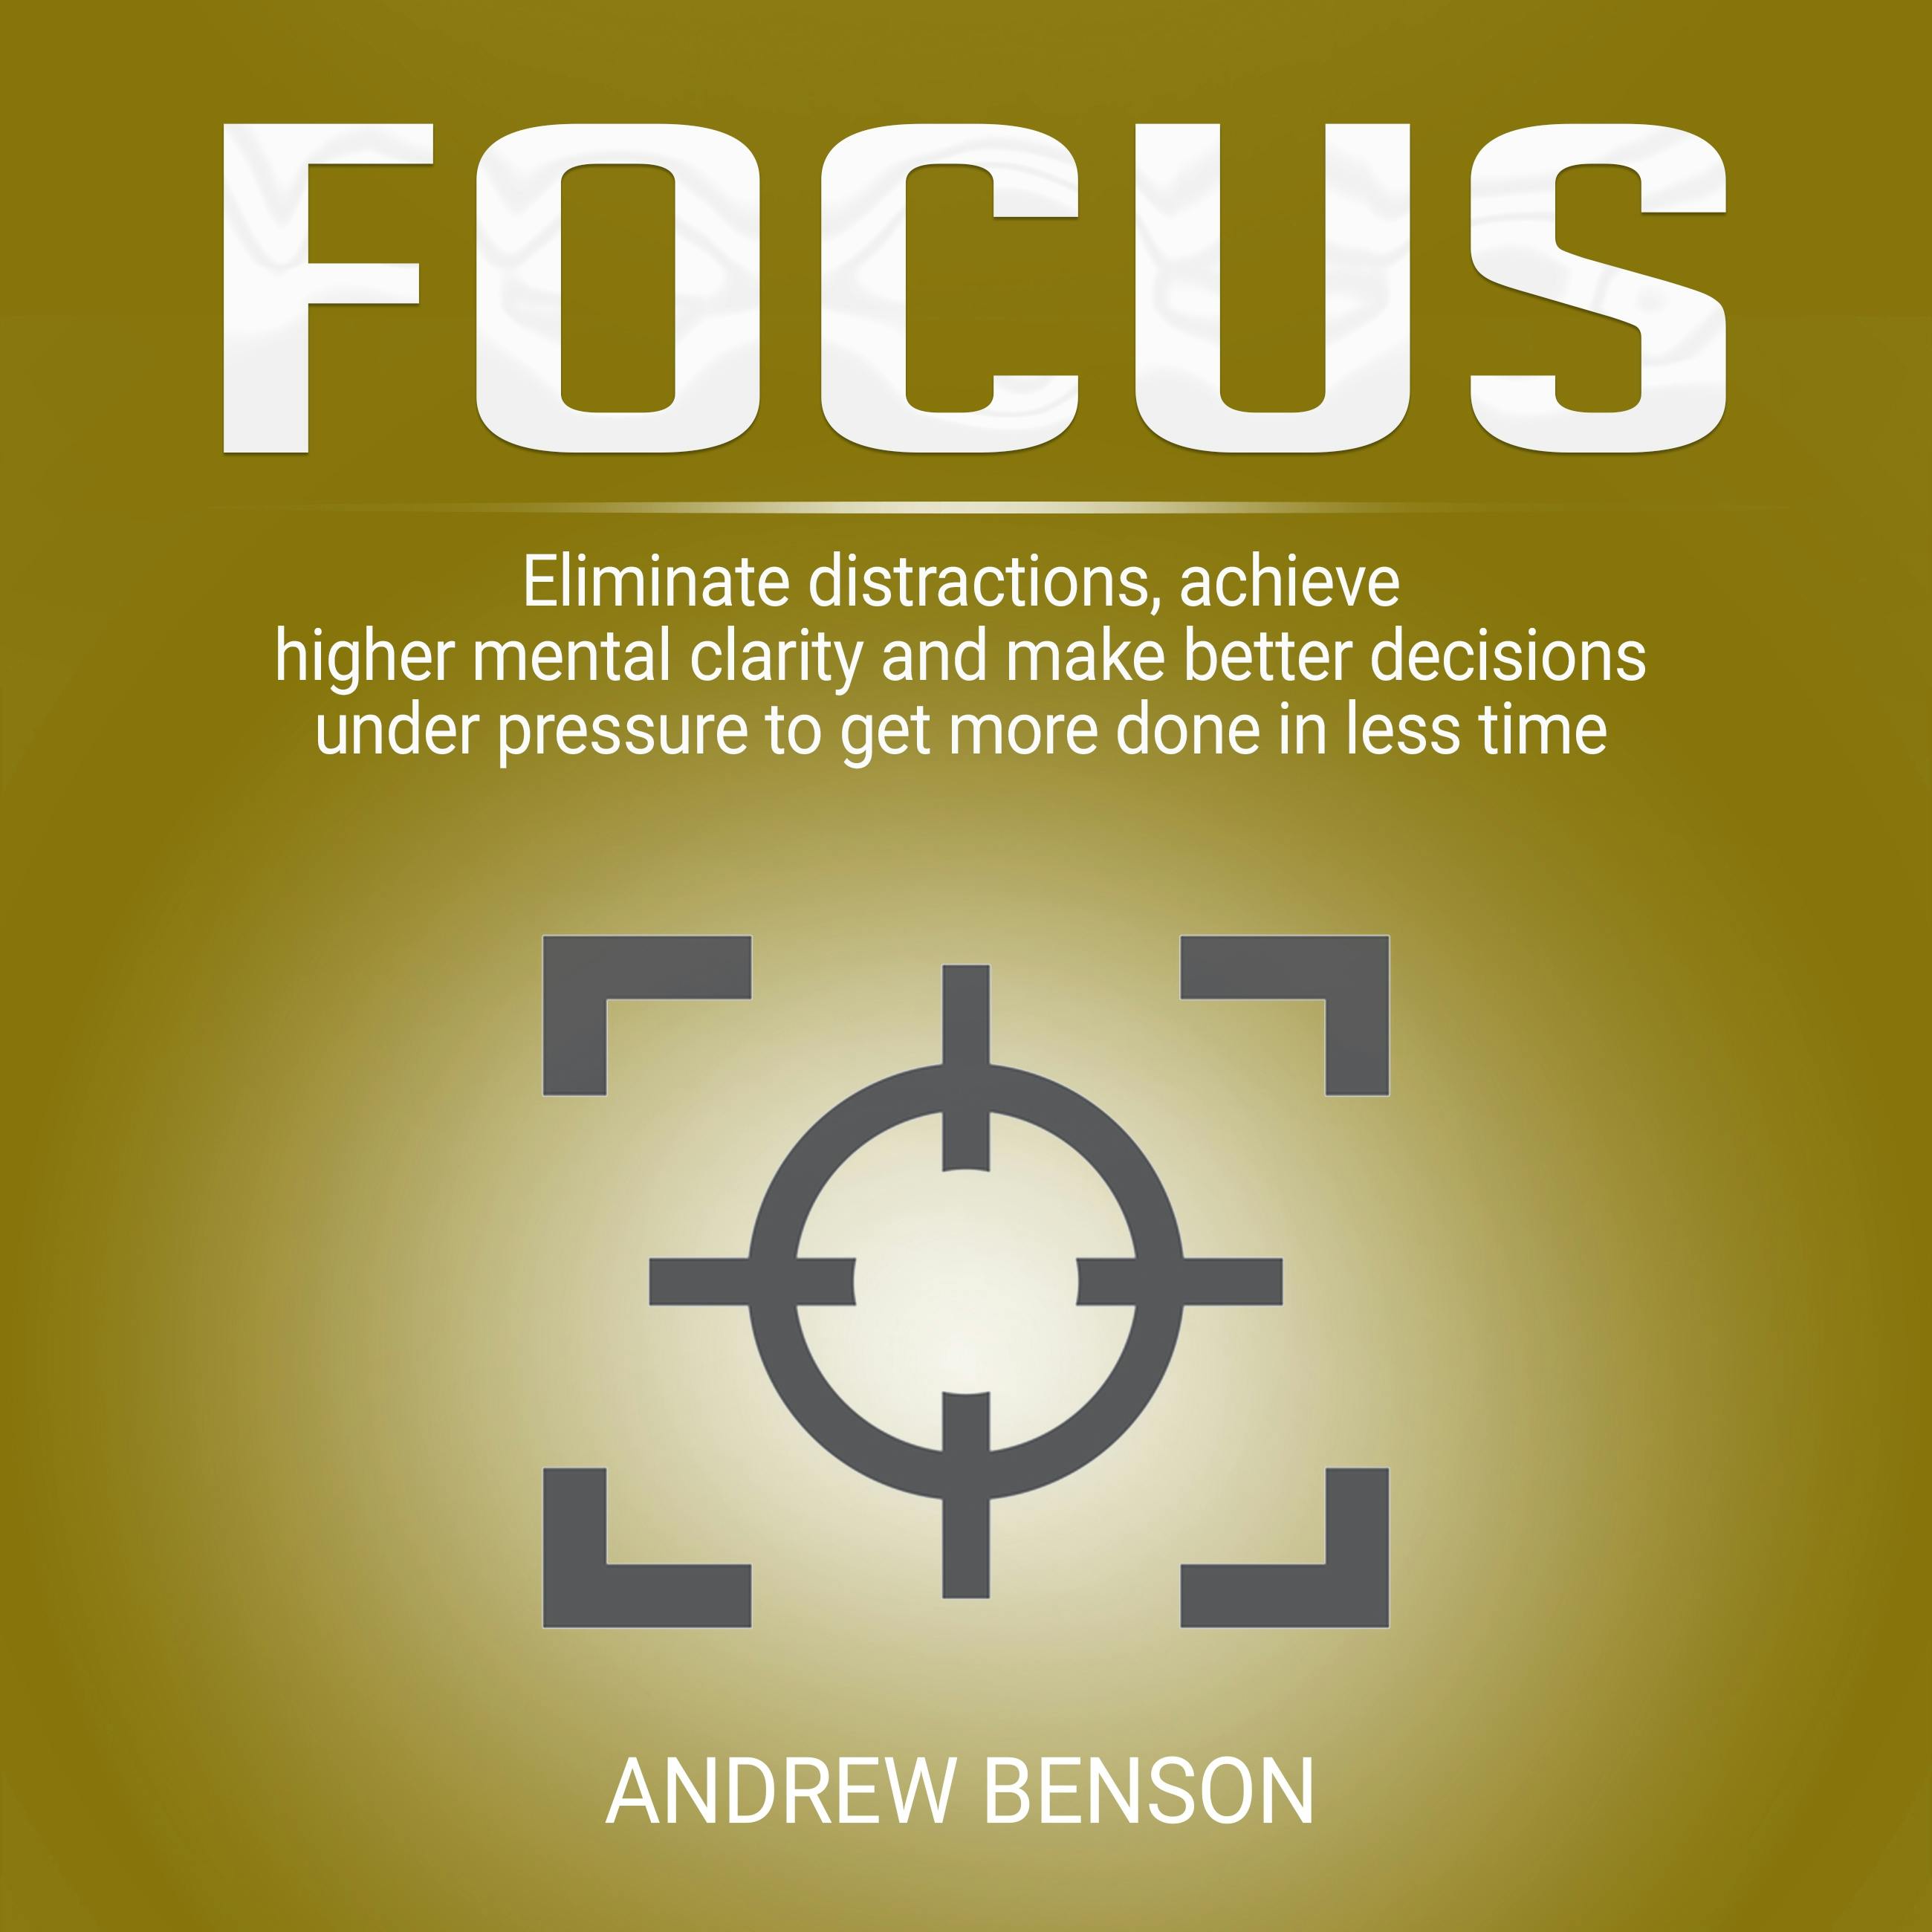 Focus: Eliminate distractions, achieve higher mental clarity and make better decisions under pressure to get more done in less time. - Andrew Benson